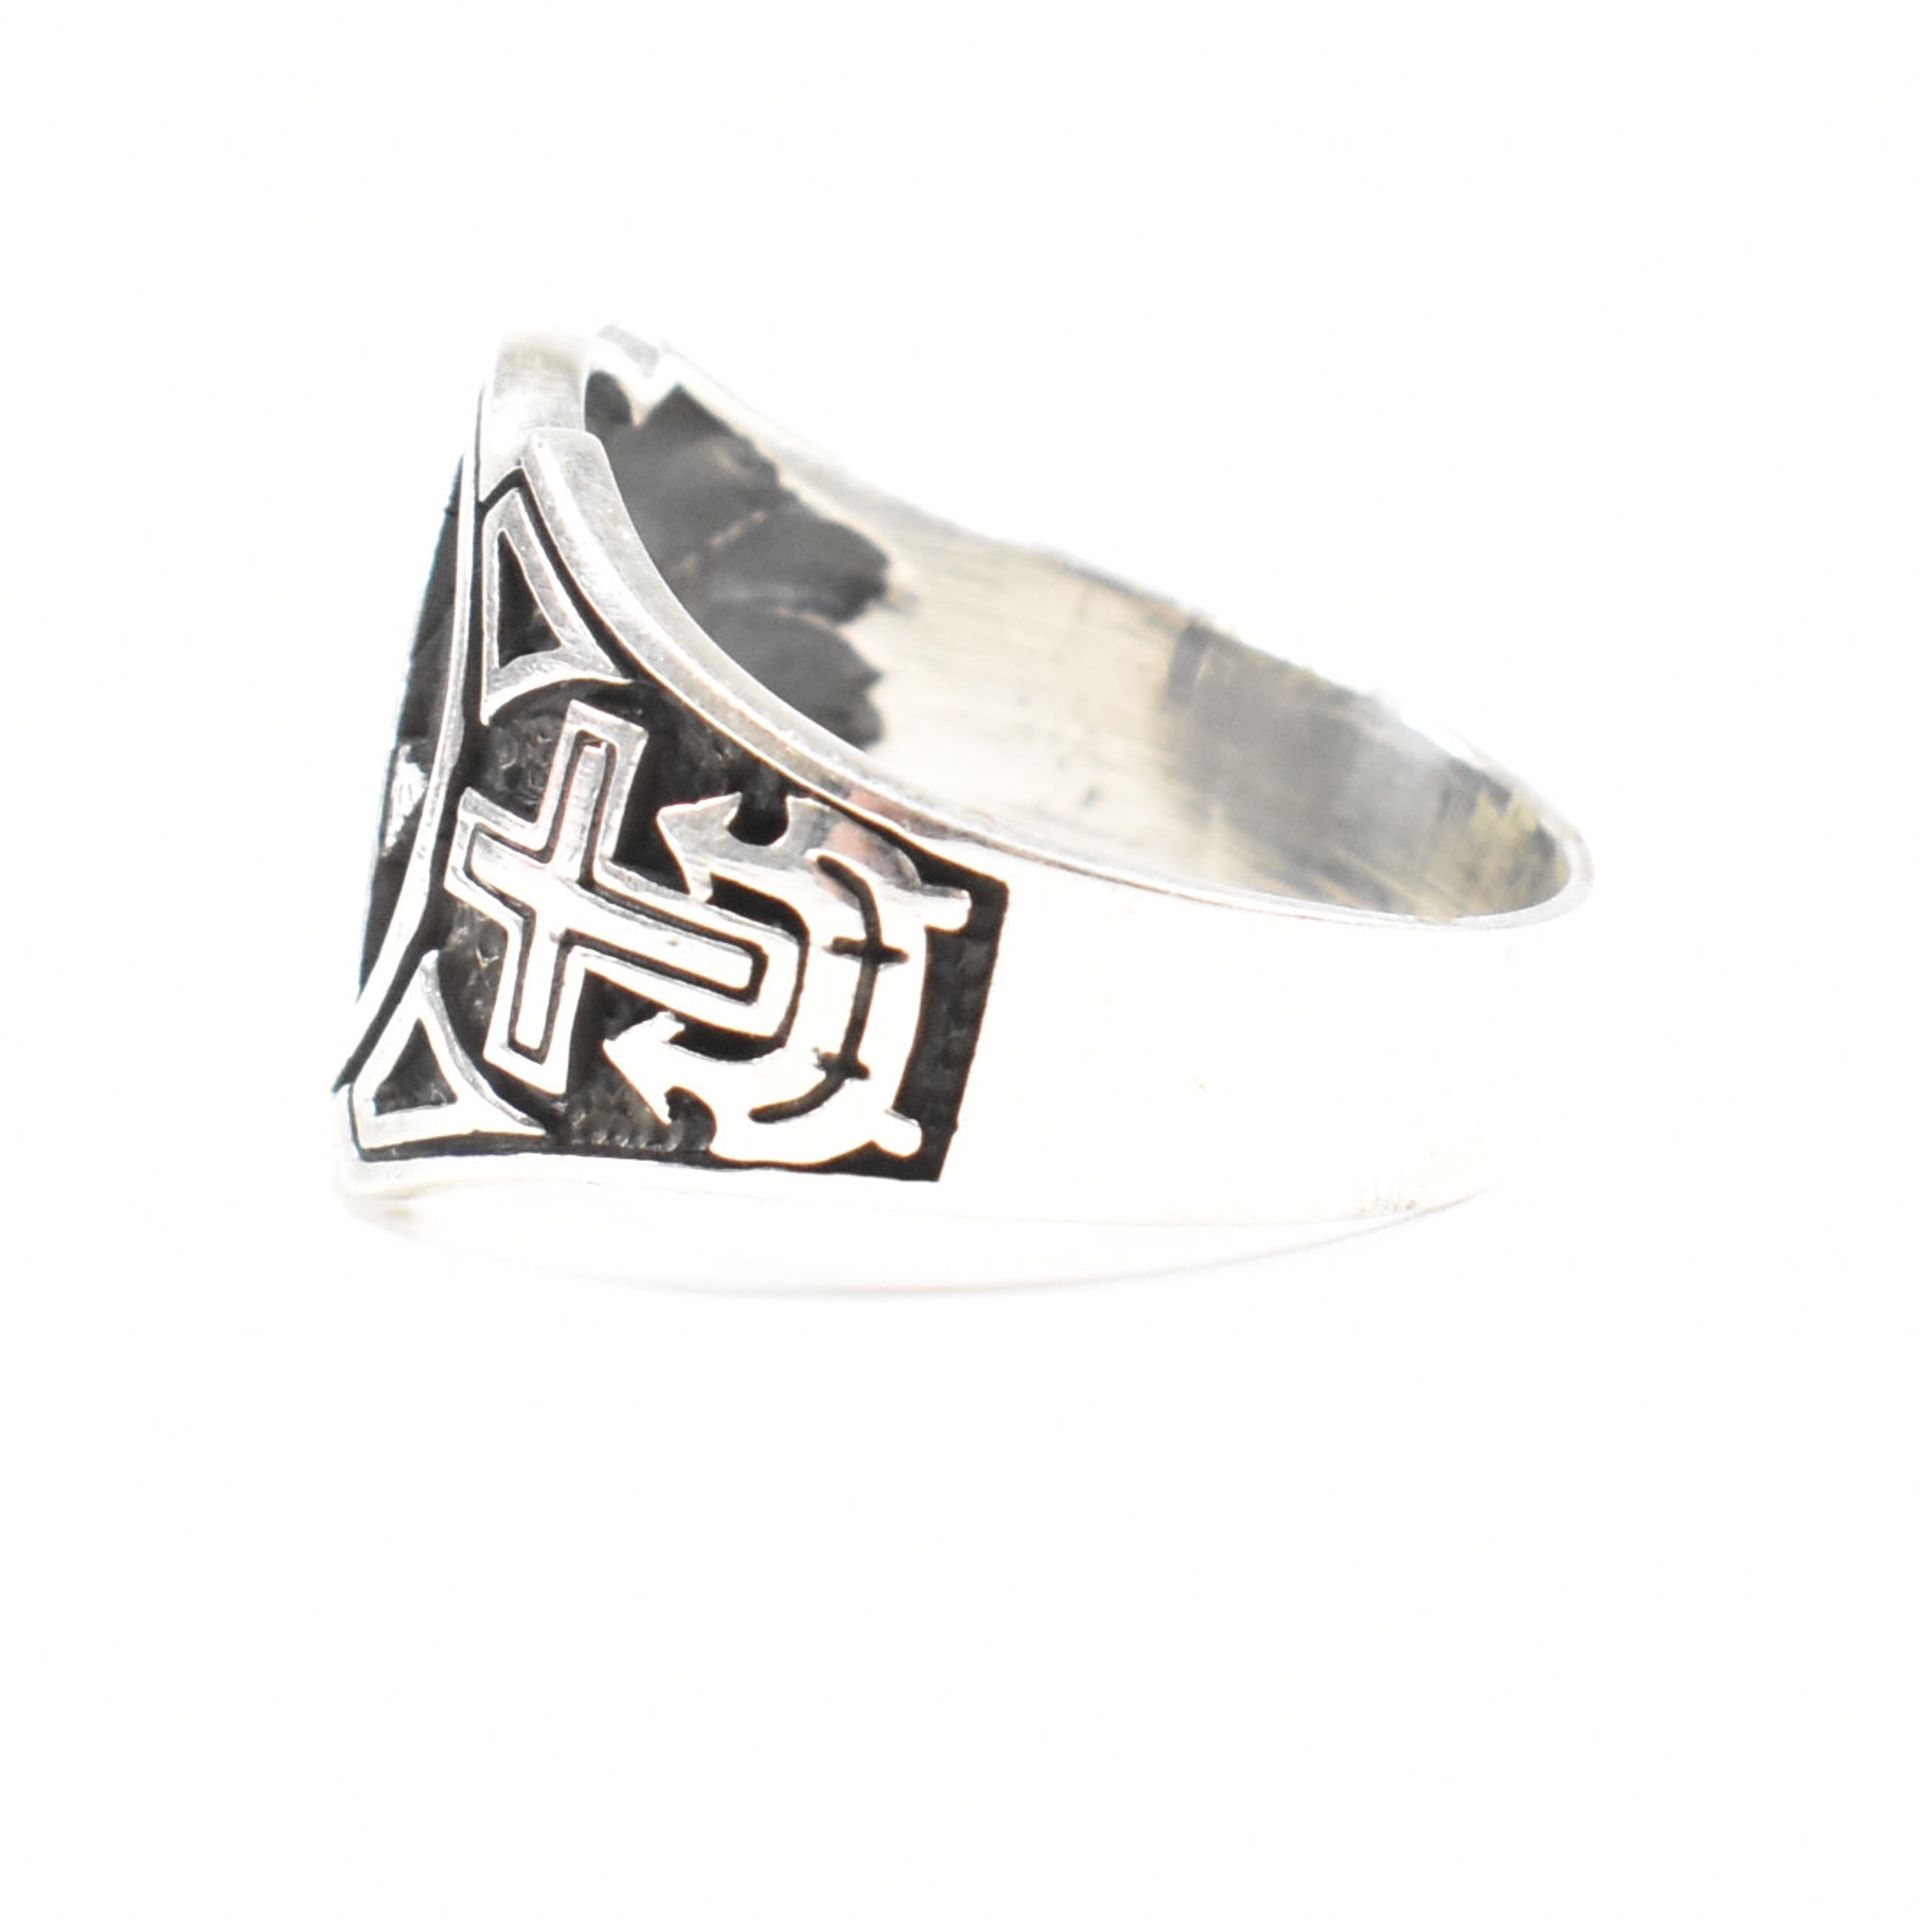 CONTEMPORARY 925 SILVER MASONIC STYLE RING - Image 3 of 7